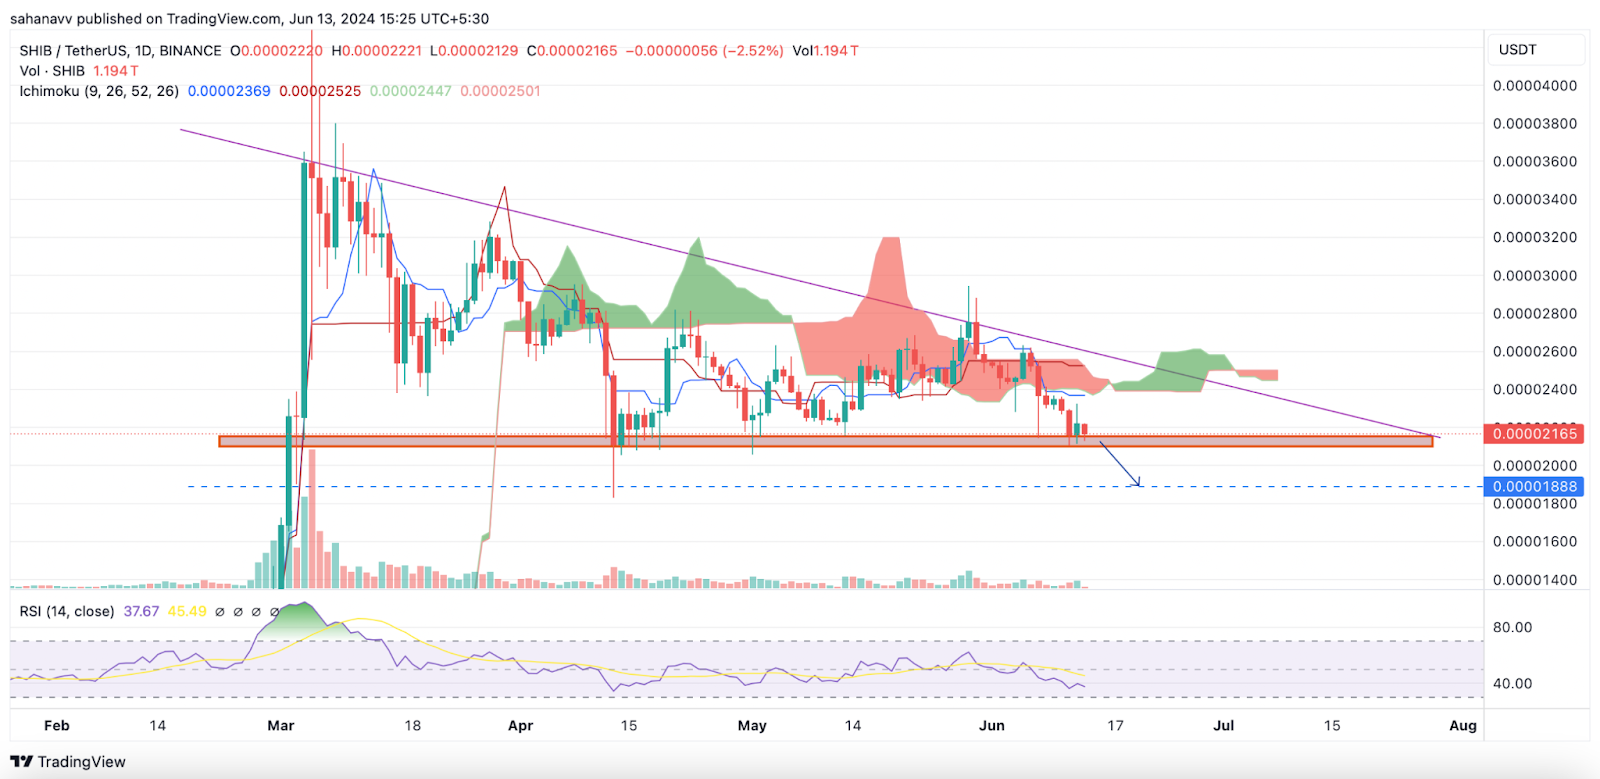 Sell Trade Triggered for This Memecoin: Can ShibArmy Lift the Shiba Inu Price Above Bearish Heat?